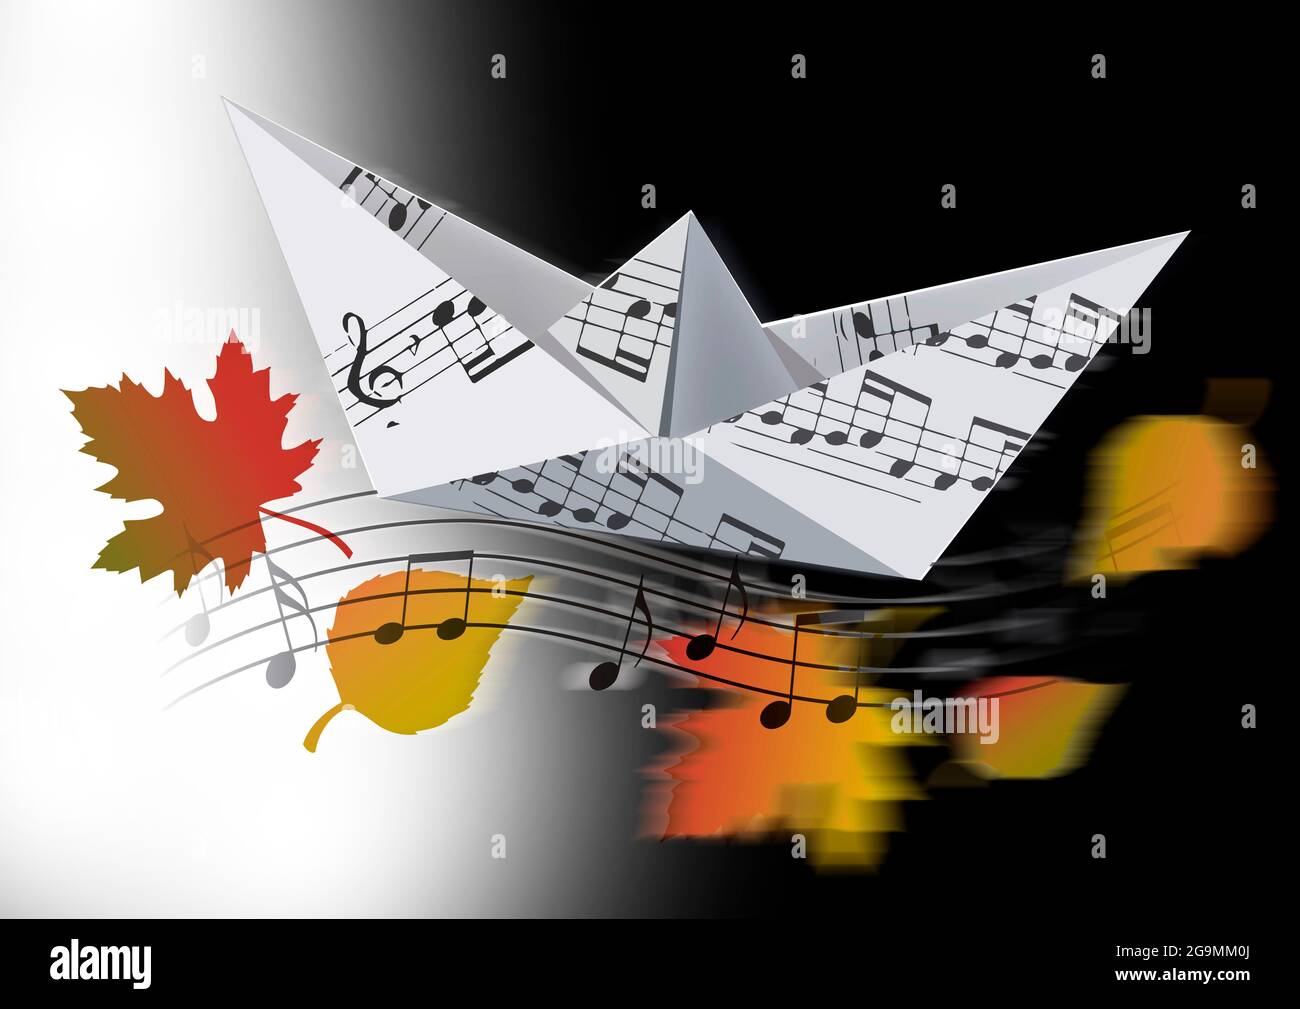 Origami boat with musical notes and autumn leaves.  Illustration of paper model of boat with music notes symbolizing autumn song. Stock Photo